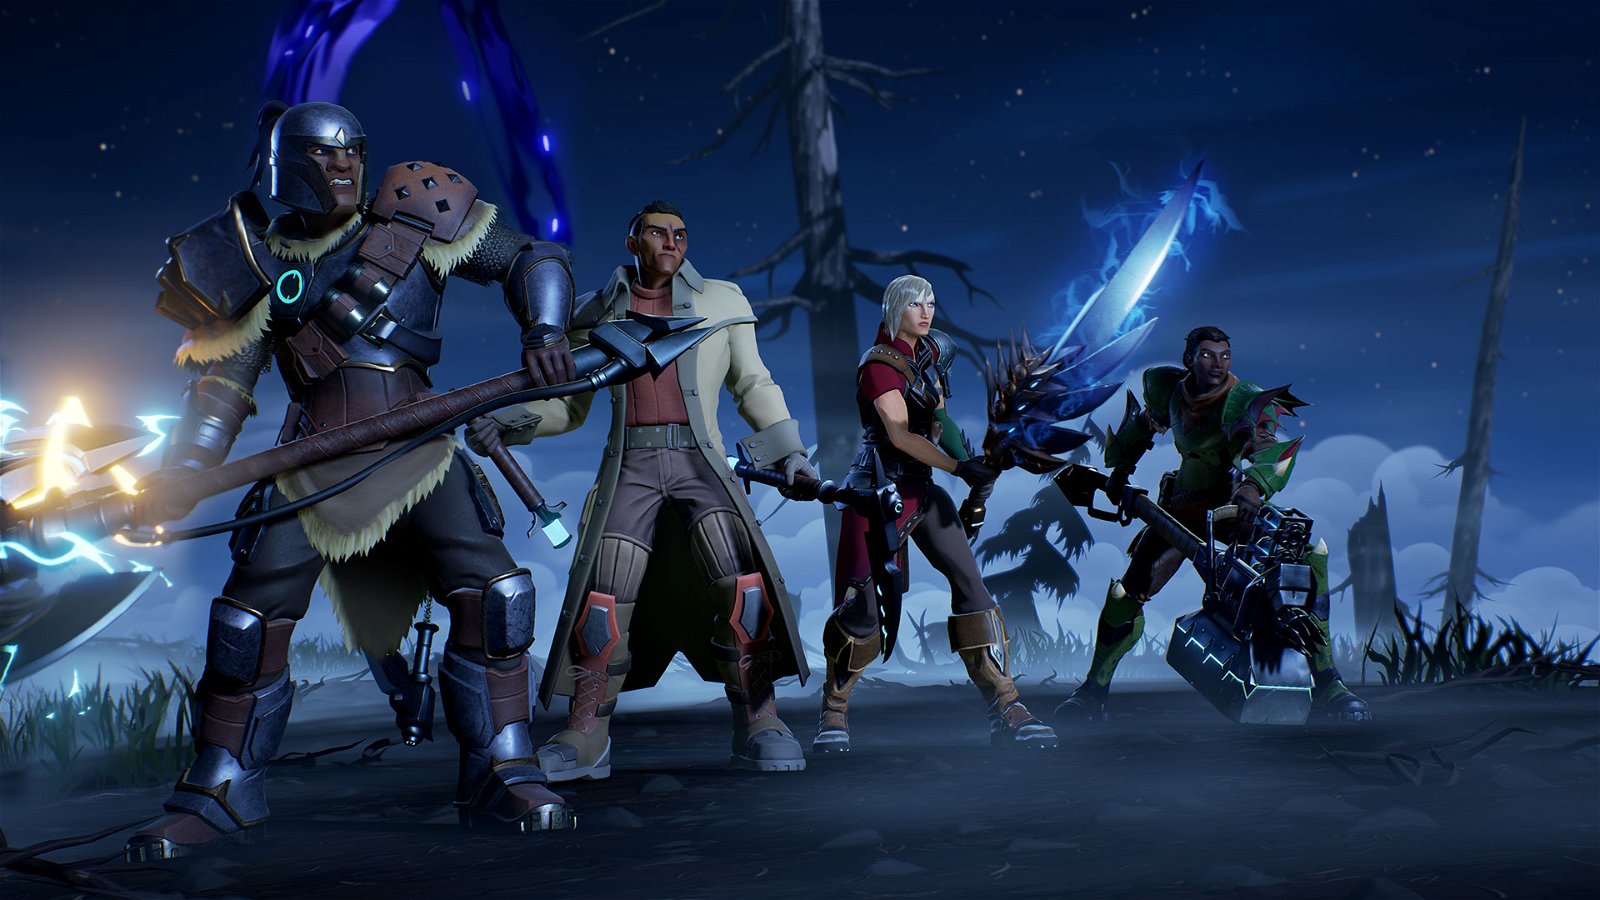 Dauntless players at the ready